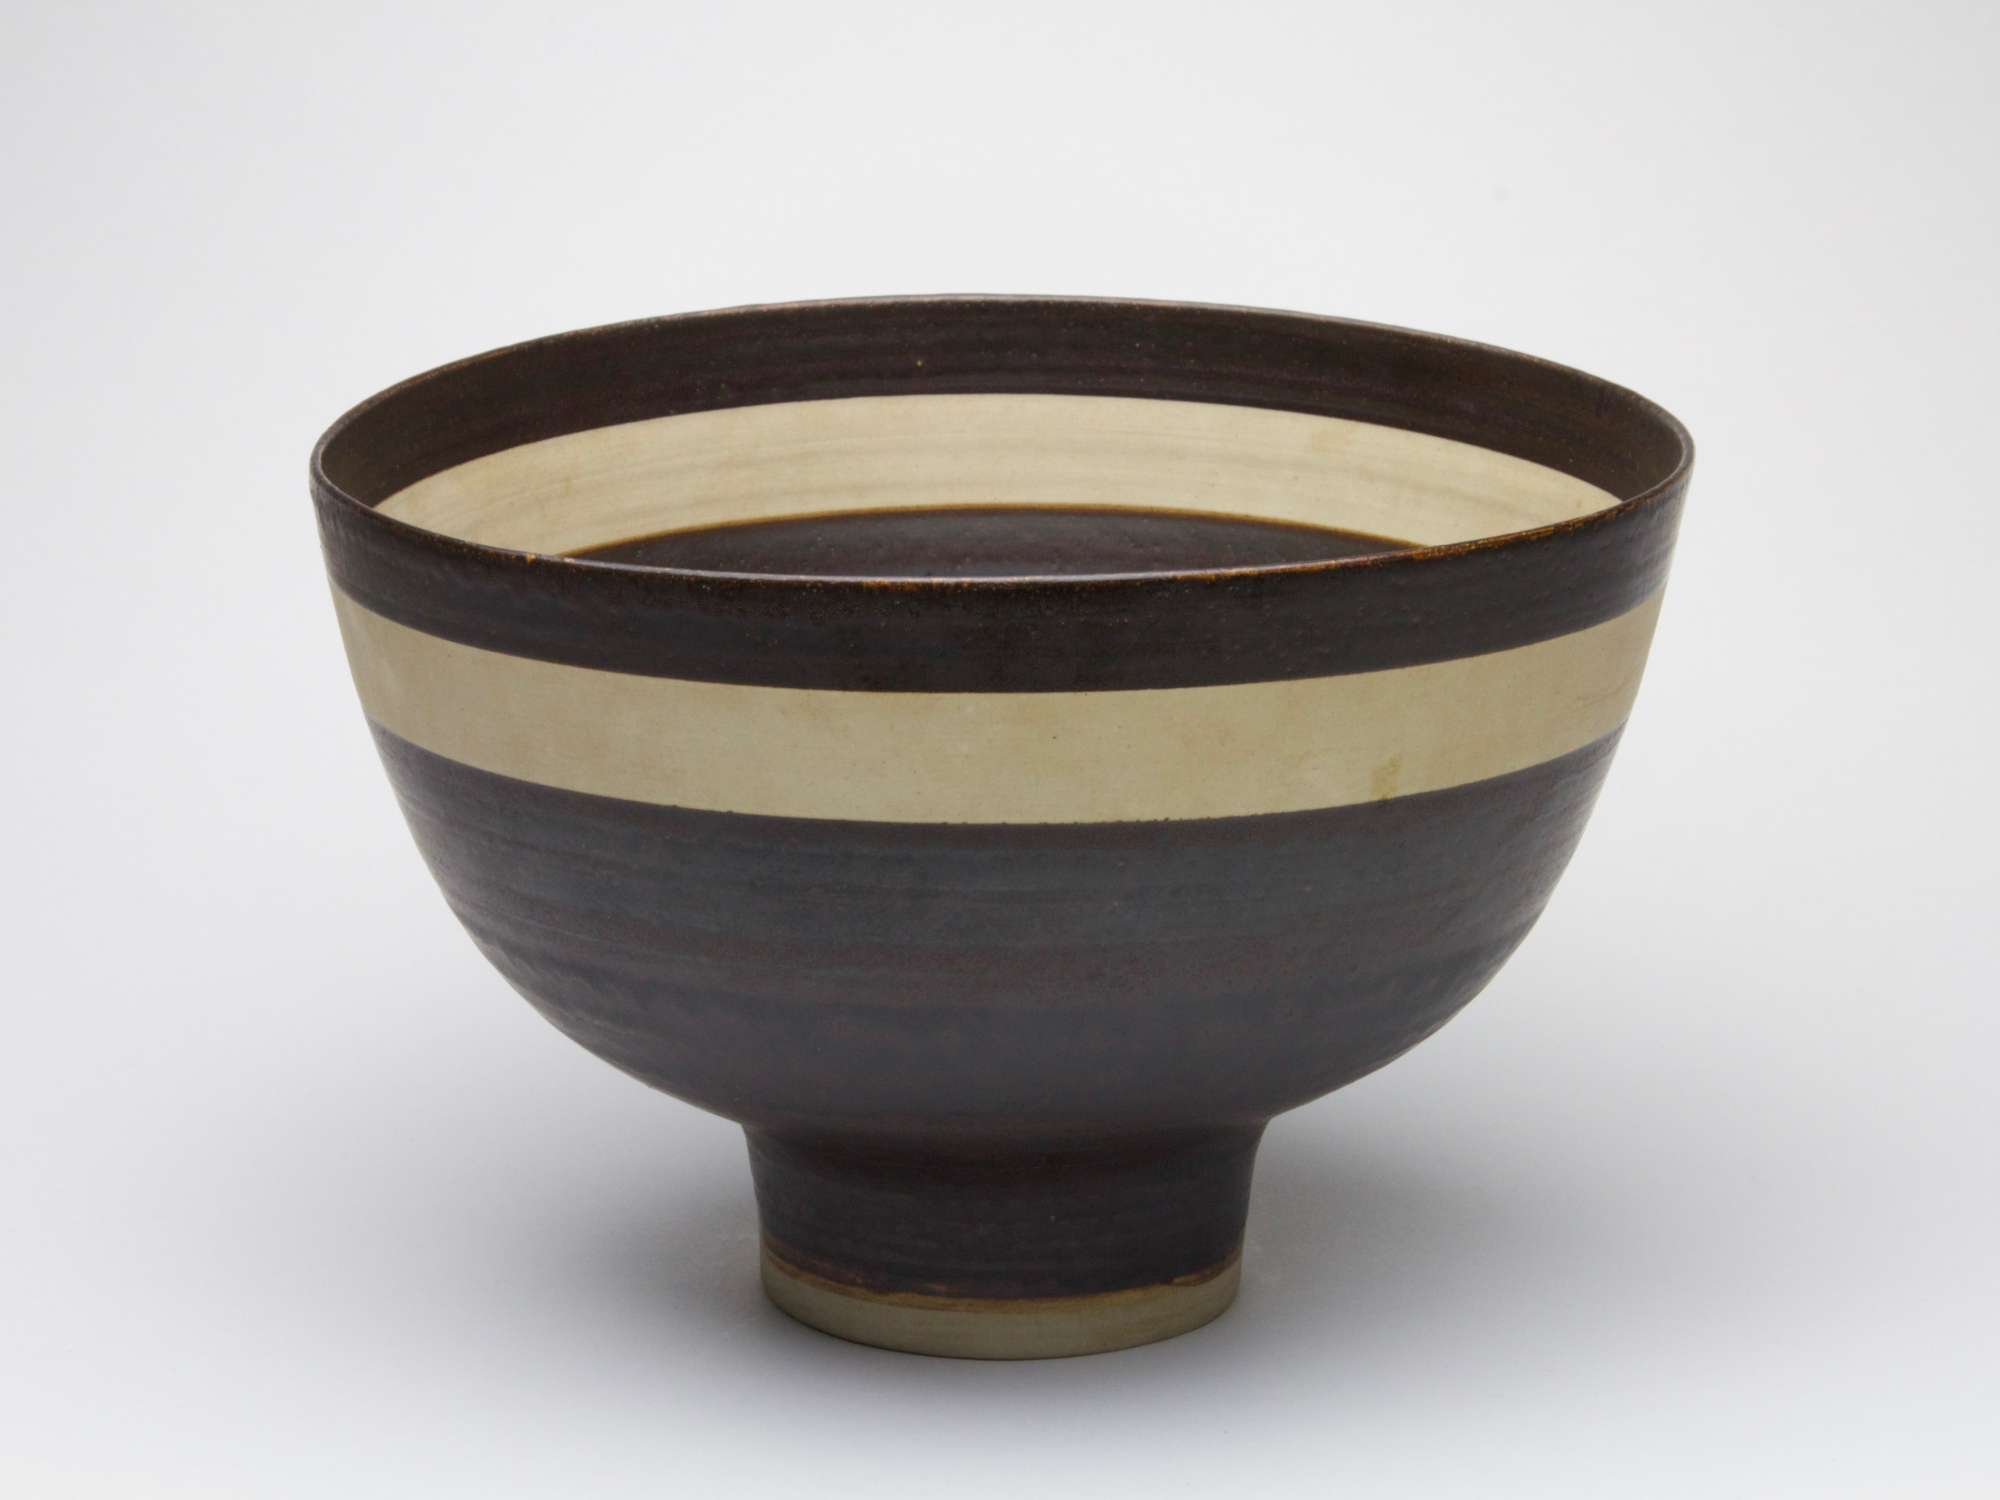 Lucie Rie, turned bowl, stamped mark LR at the bottom. Lucy Lucy Rie ArtListings